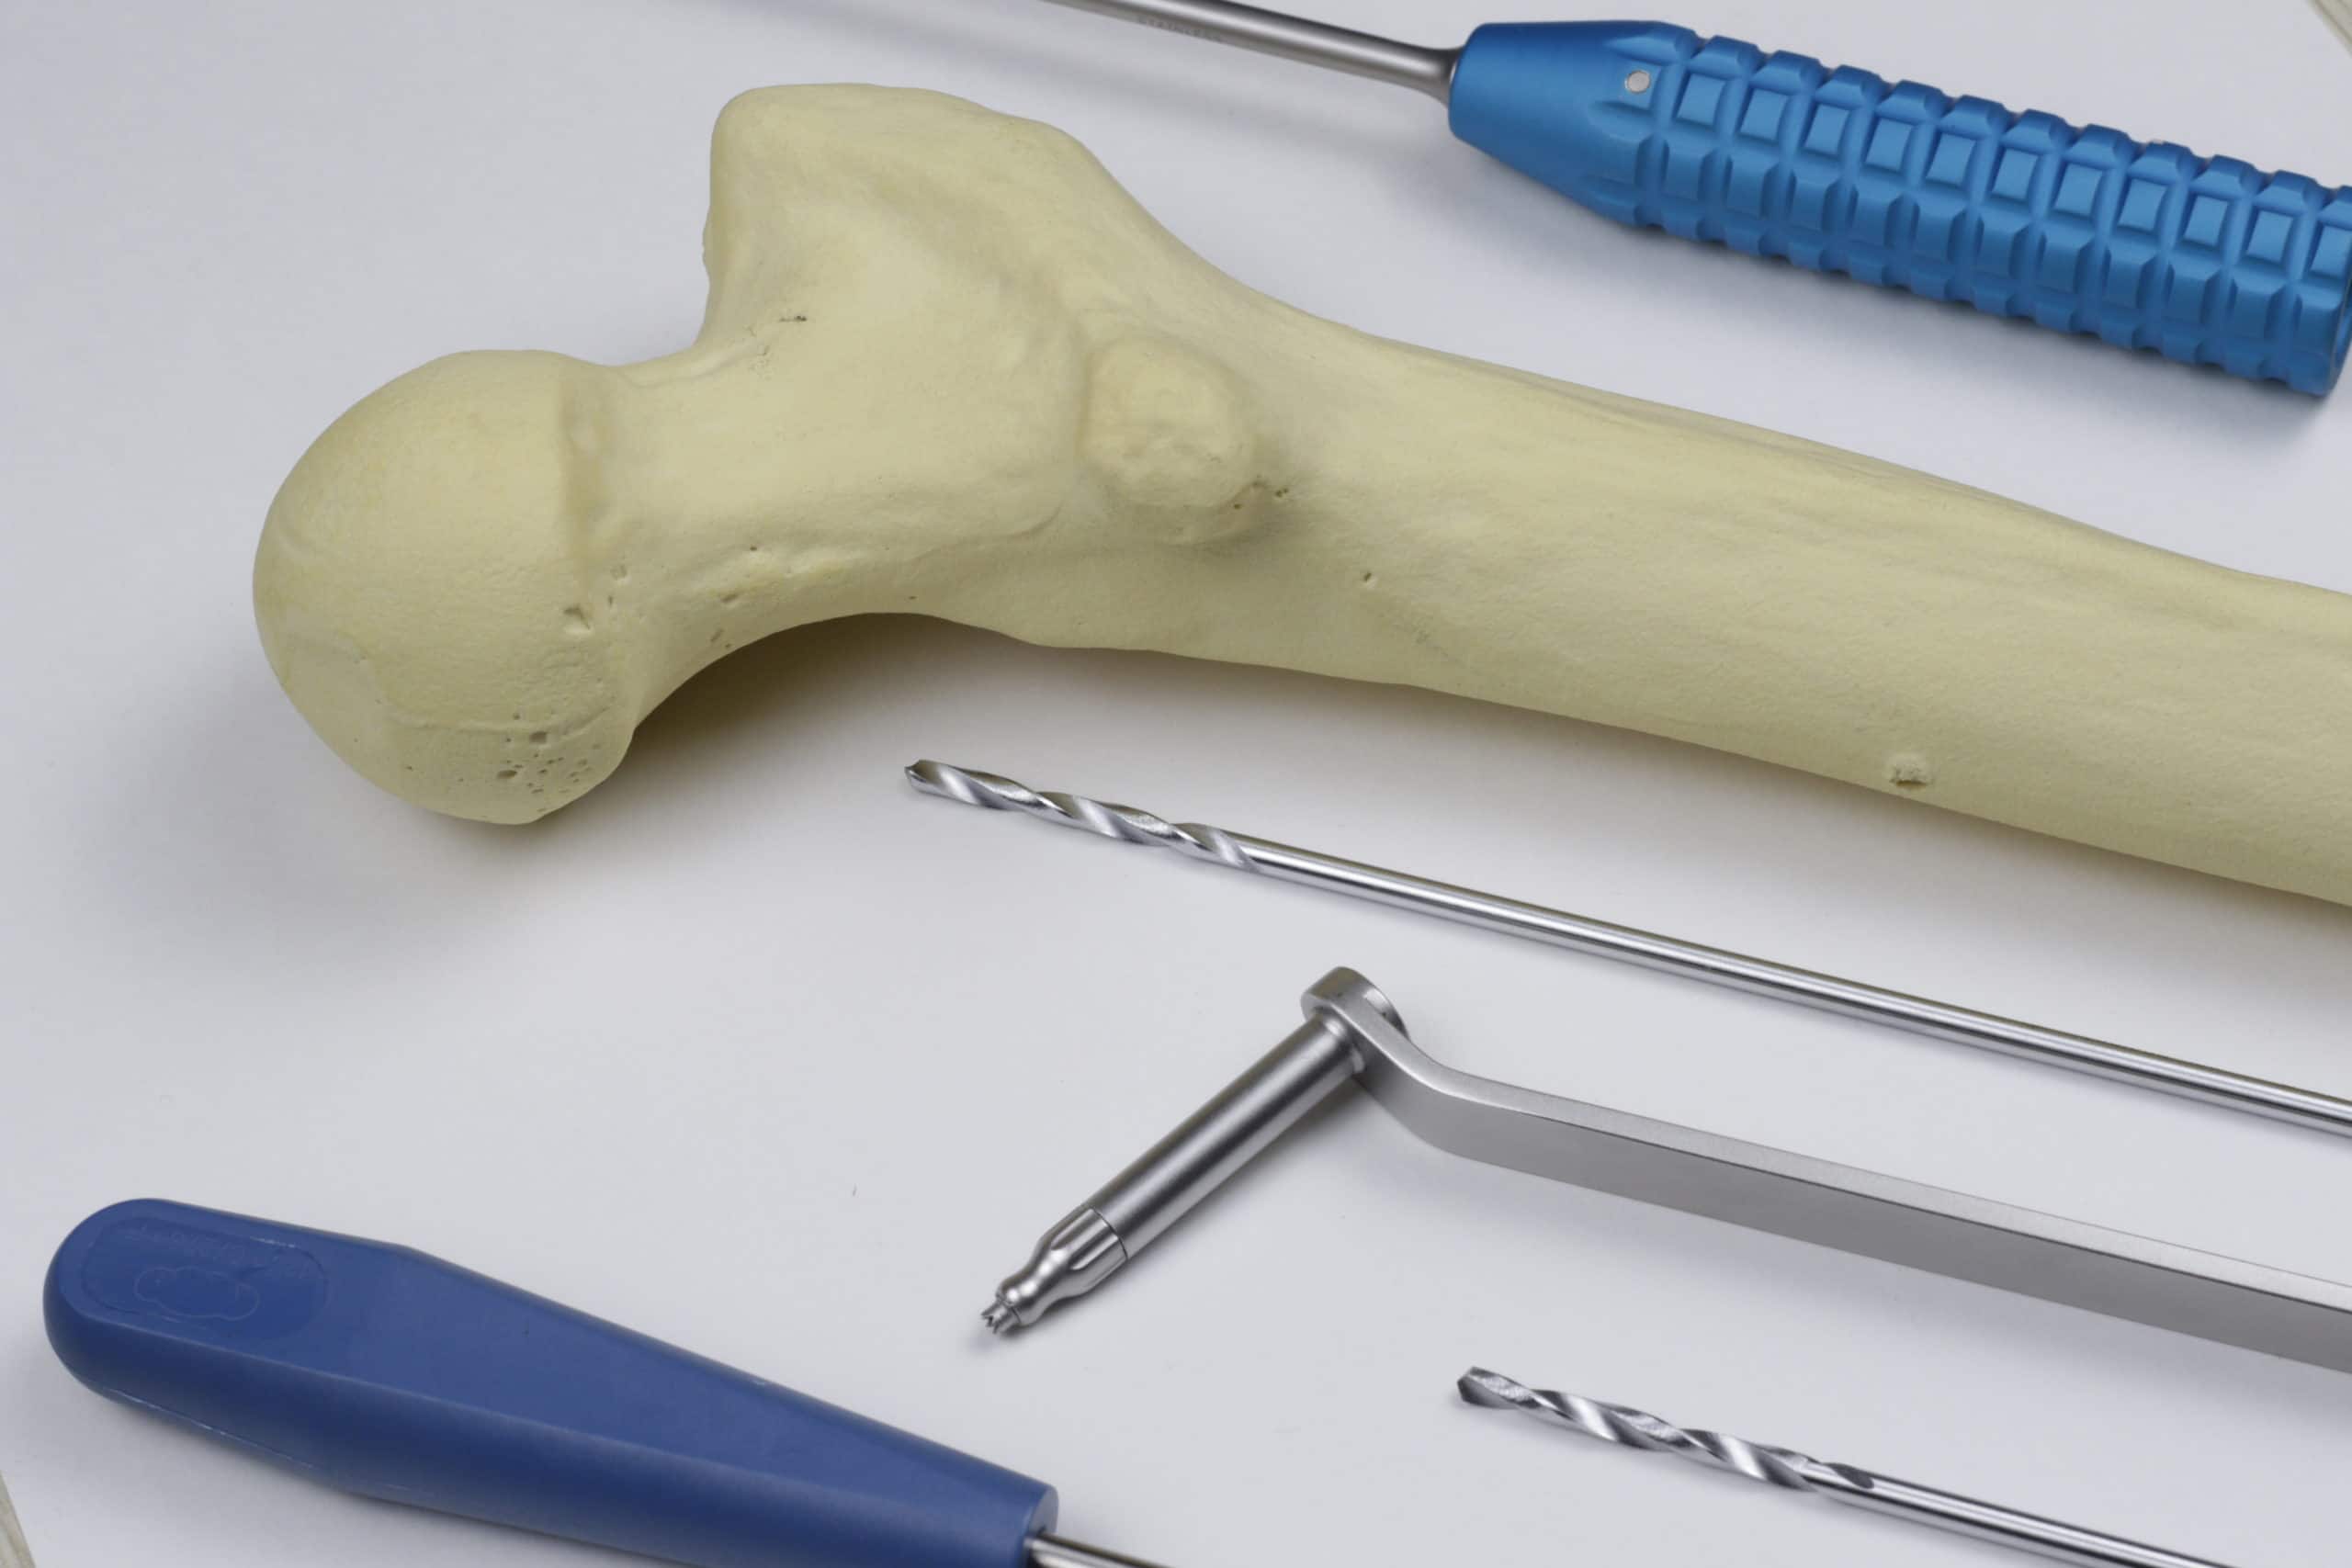 Surgical plates for osteosynthesis in case of bone fractures